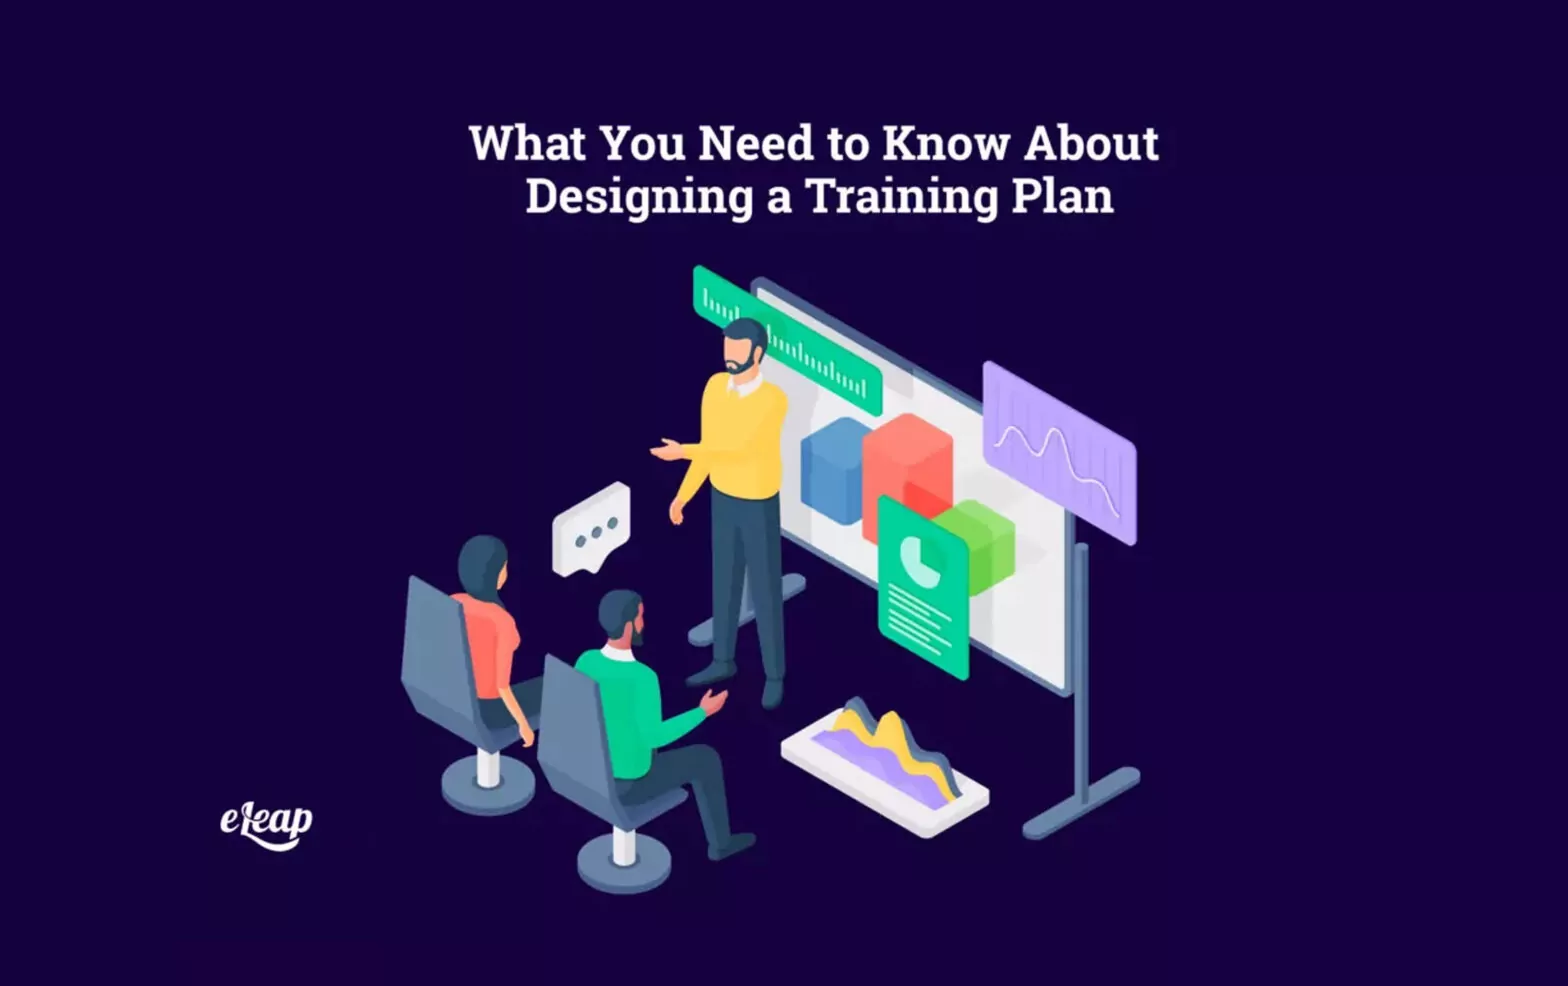 What You Need to Know About Designing a Training Plan